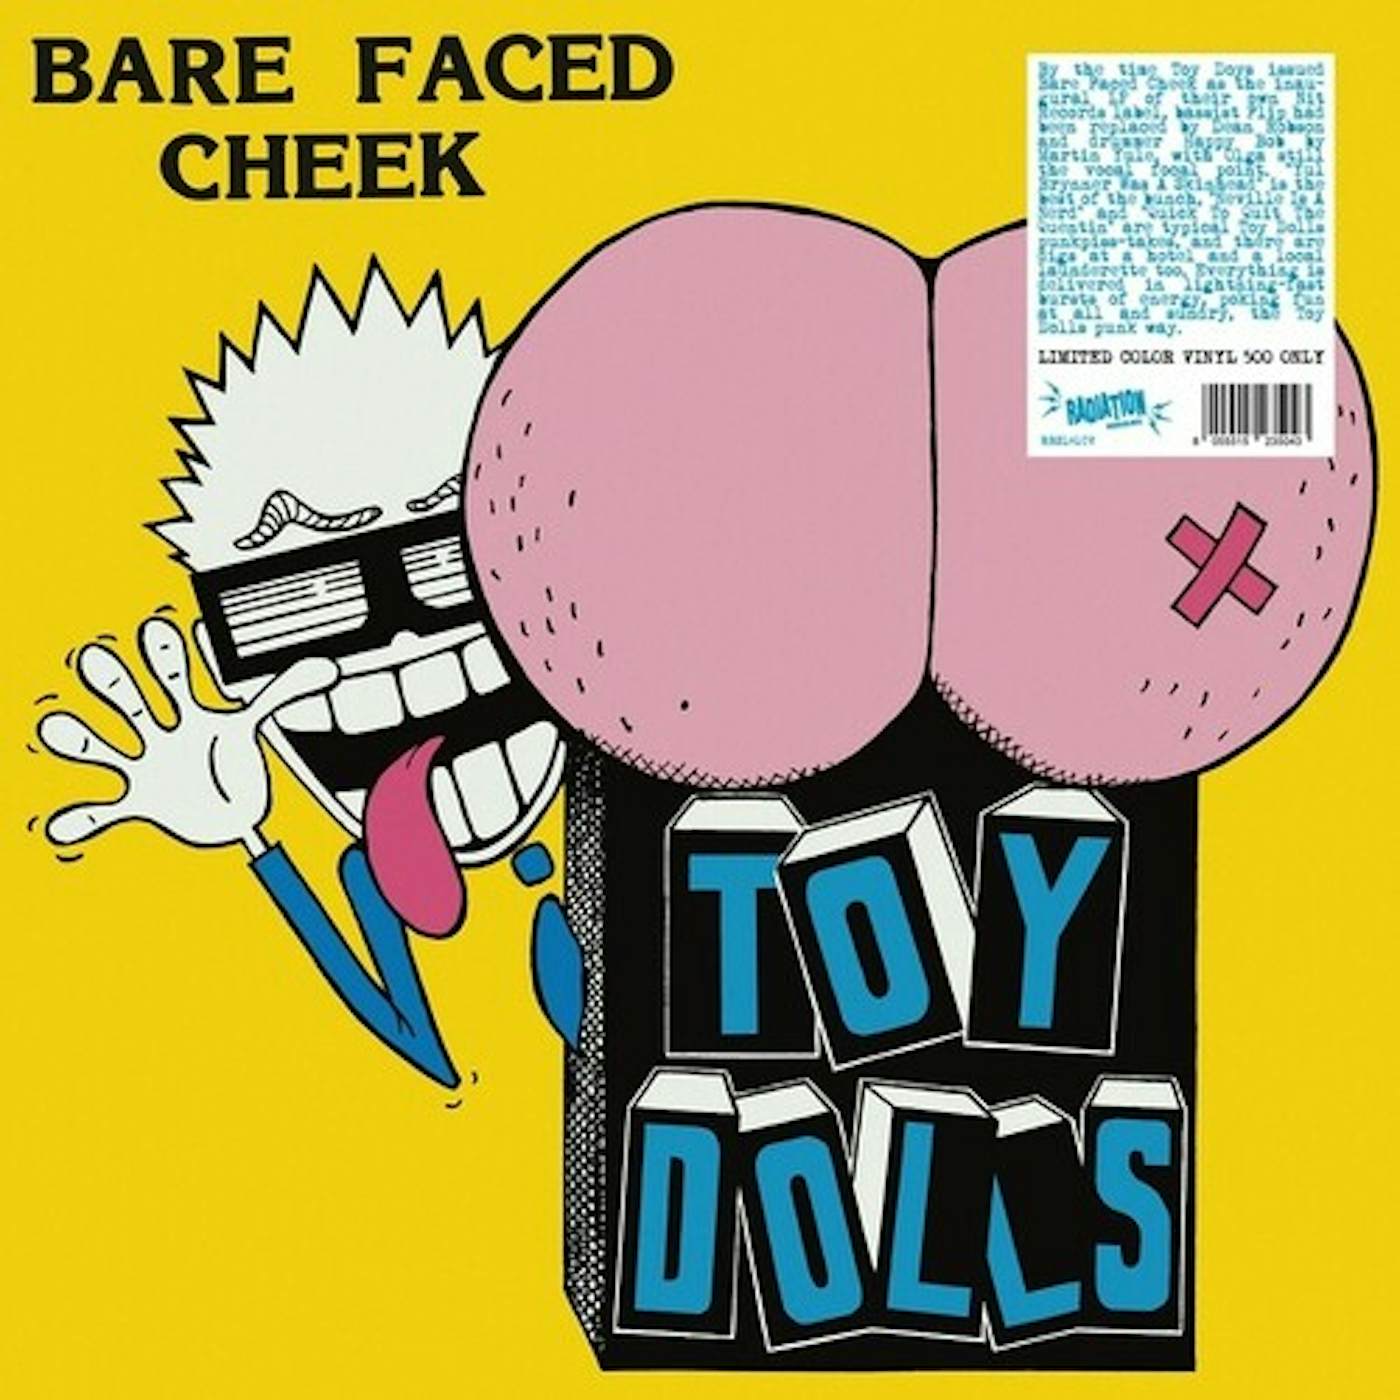 The Toy Dolls BARE FACED CHEEK Vinyl Record